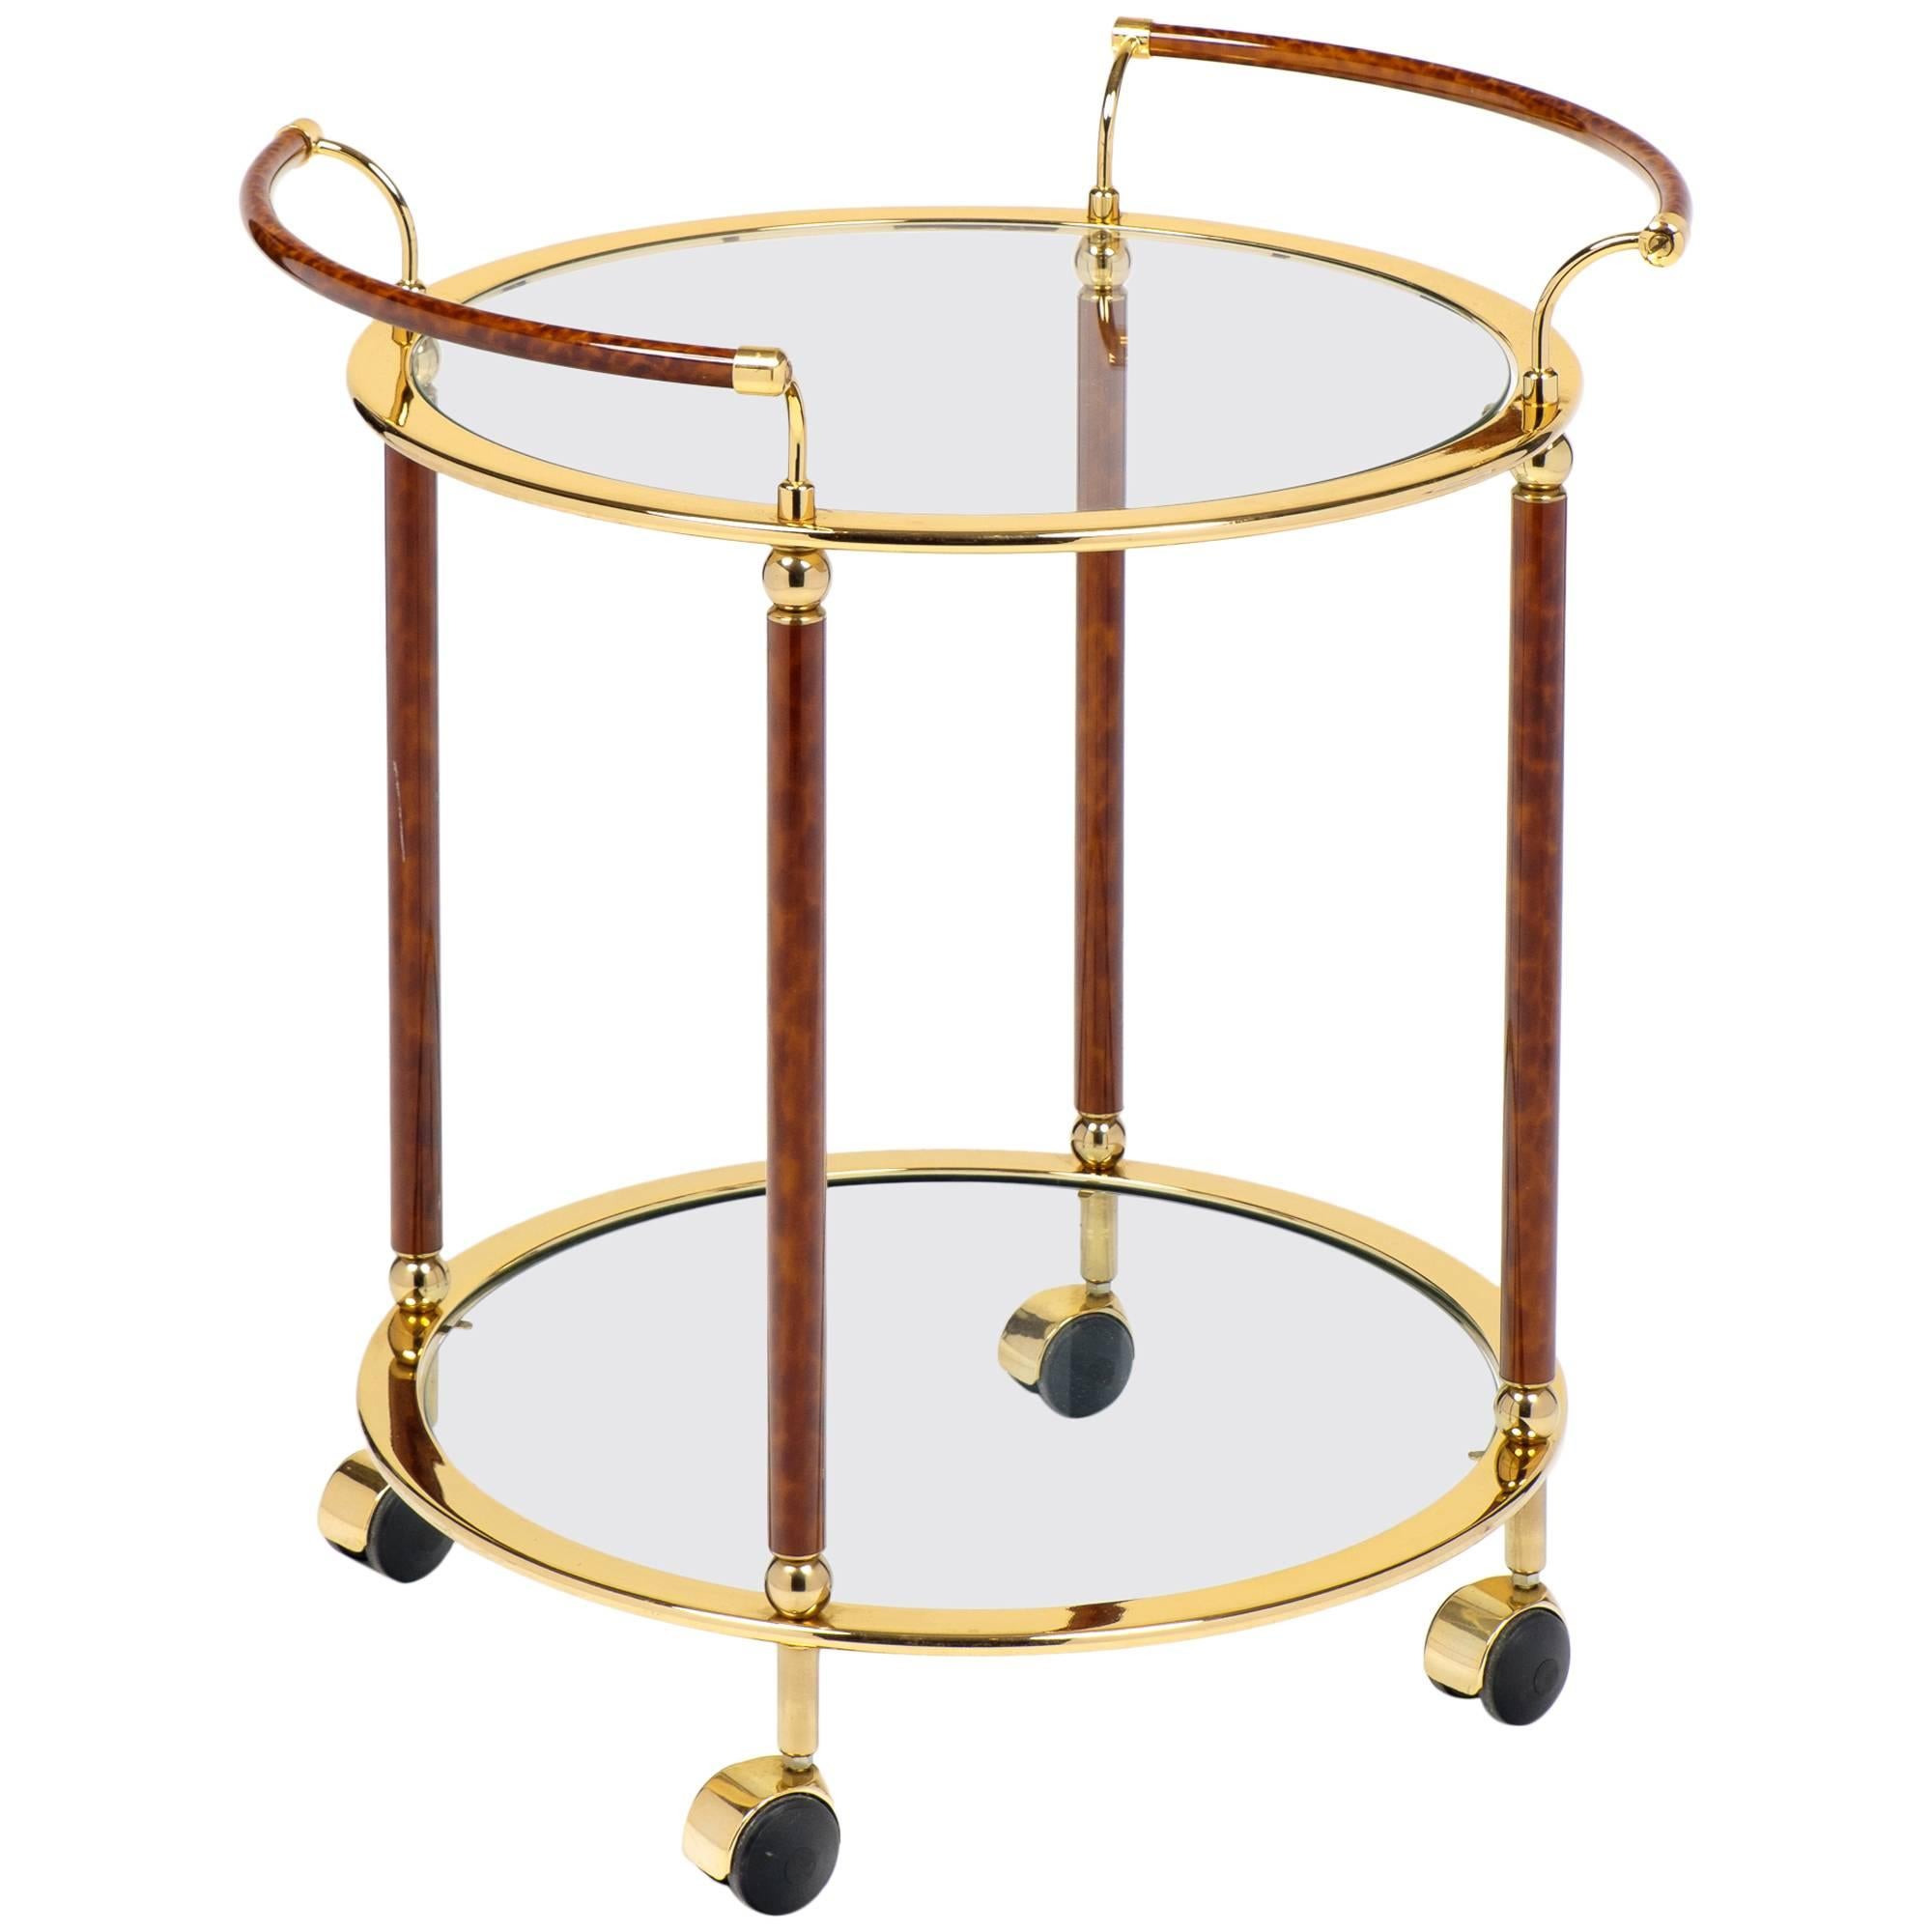 Vintage French Round Brass Glass Top Bar Cart by Maison Lancel